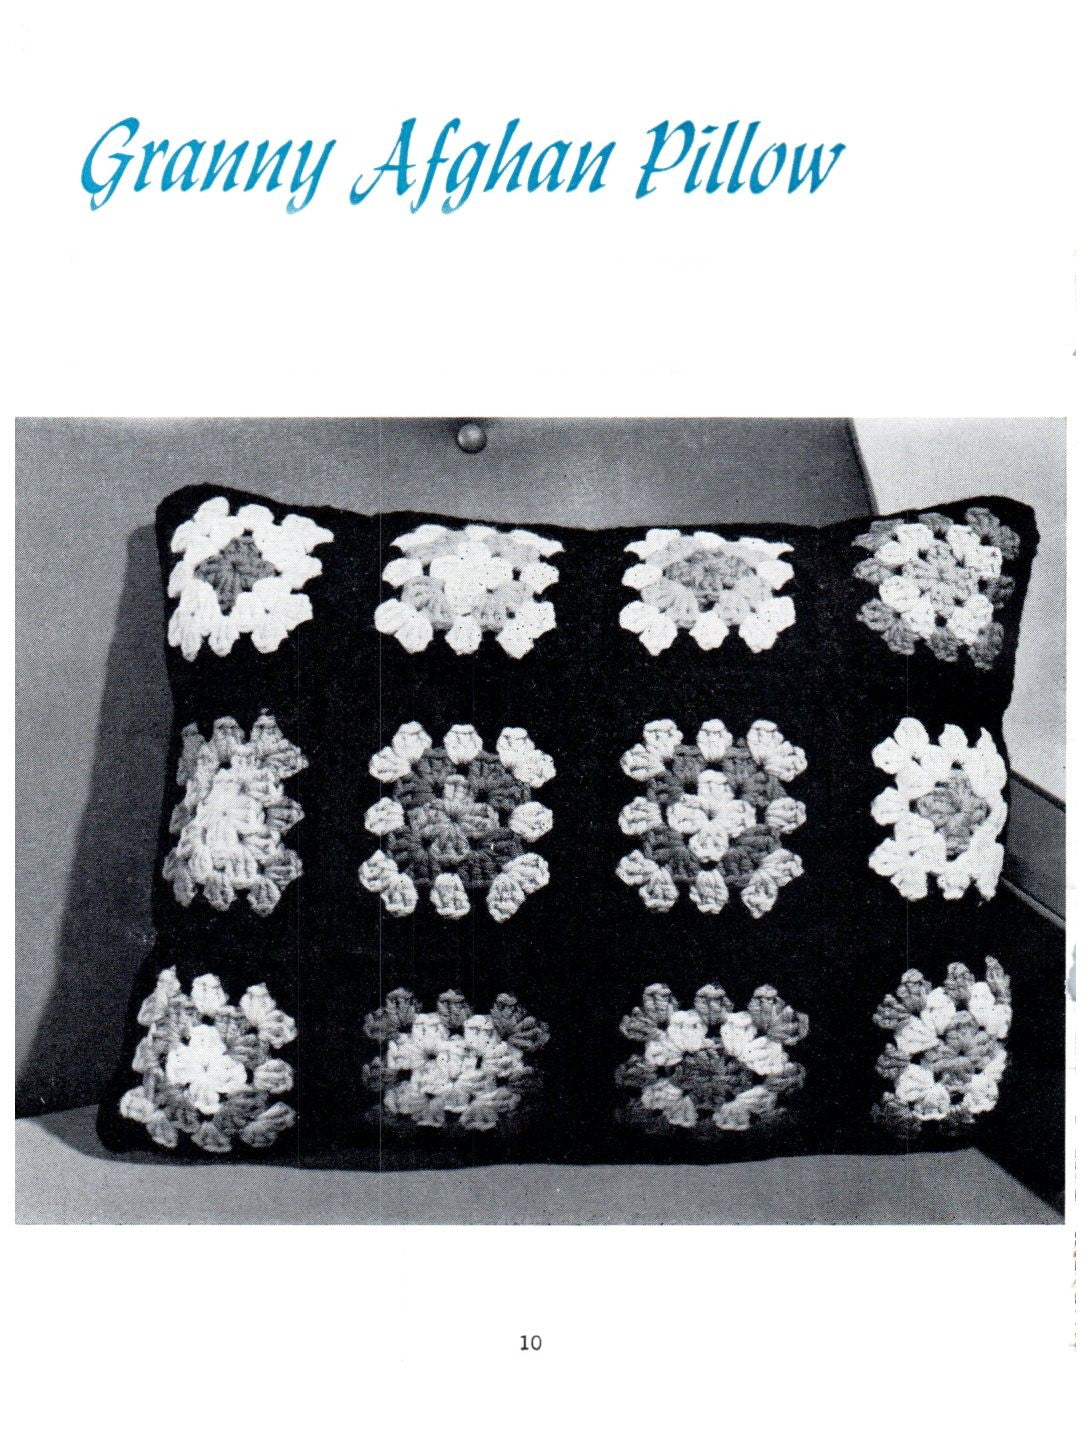 Afghans & Pillows Crochet and Knit Dawn Book No. 181 by American Thread Downloadable PDF - At Grandma's Table